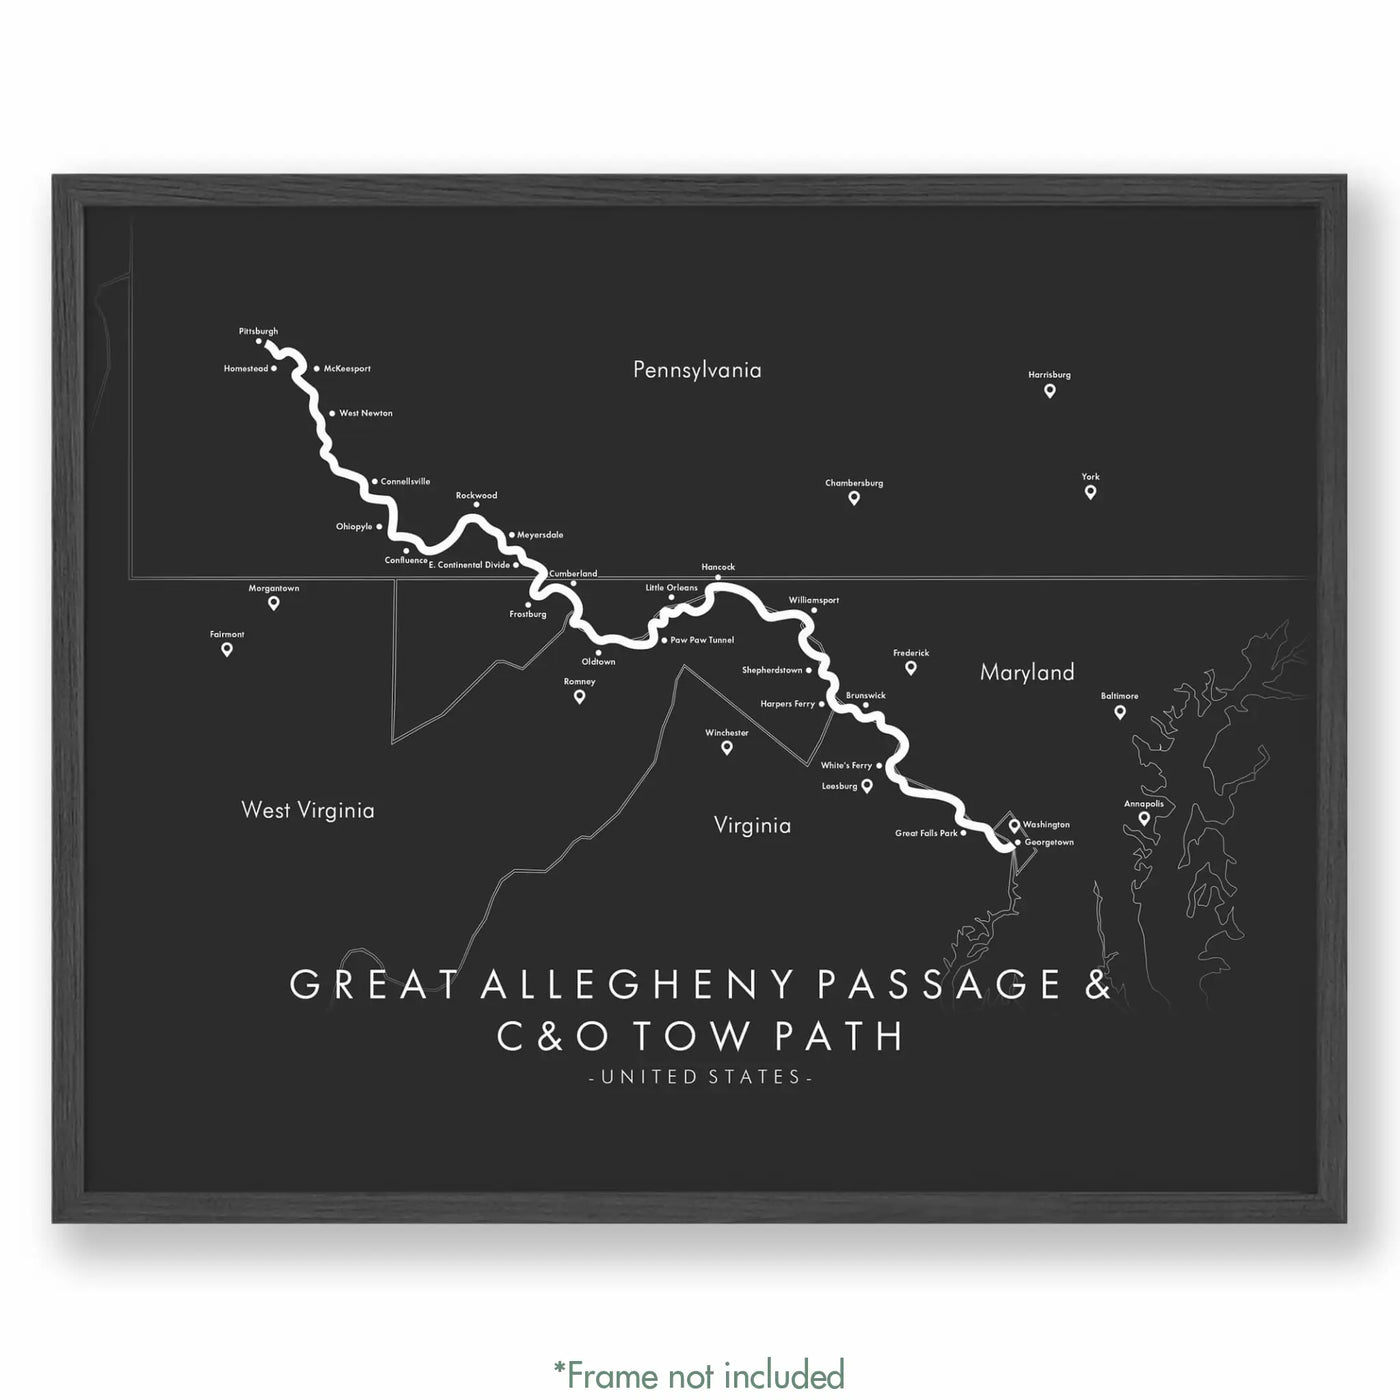 Trail Poster of Great Allegheny Passage & C&O Tow Path - Grey